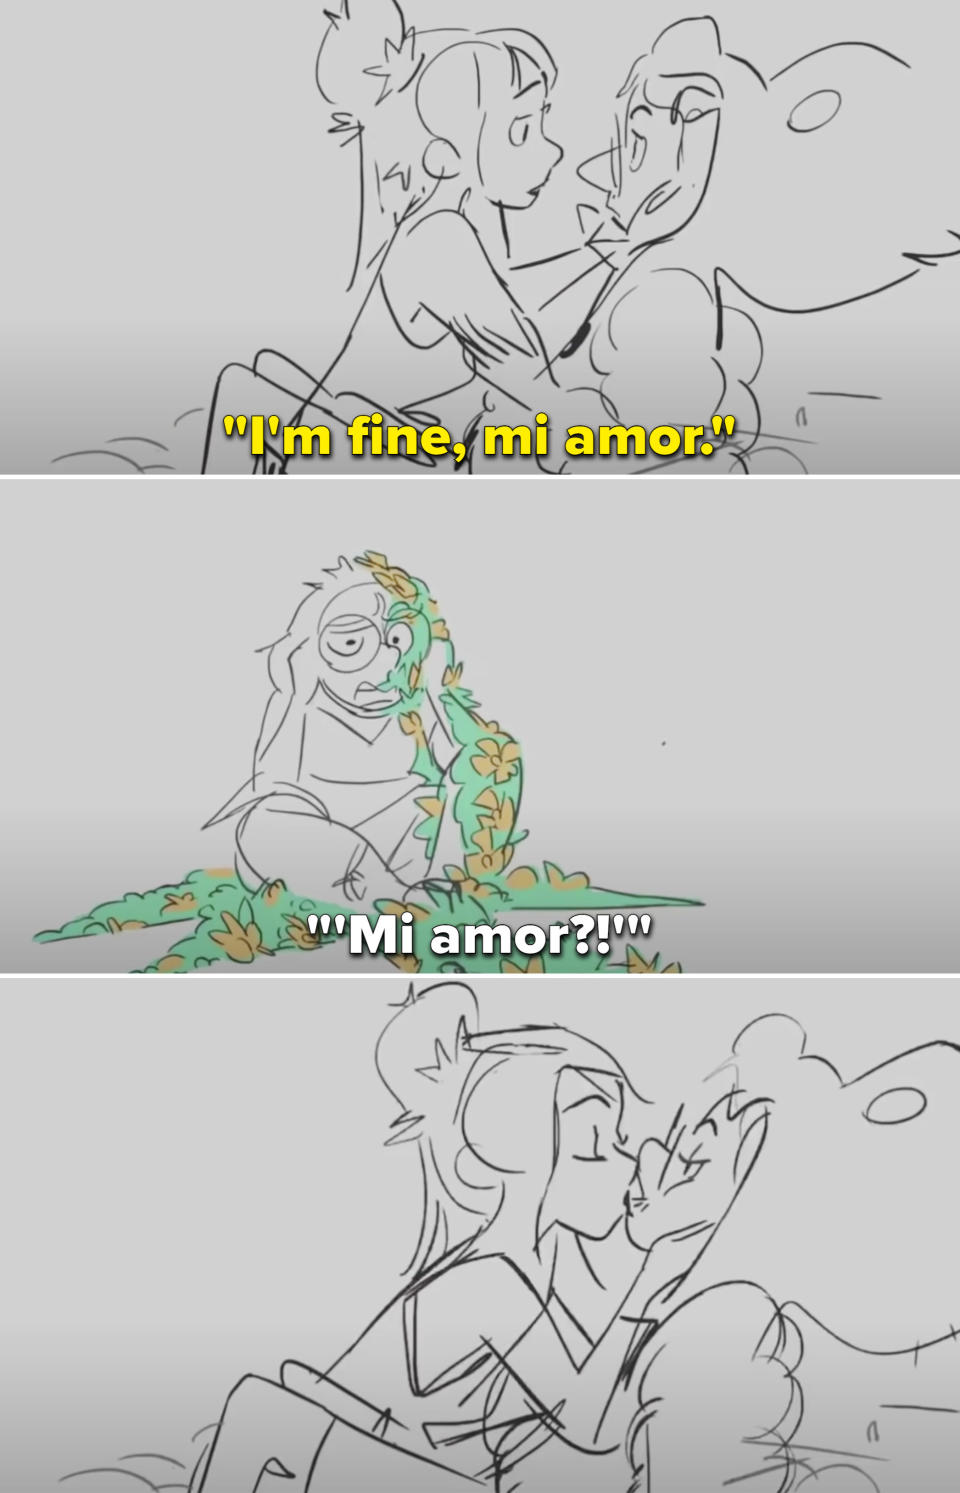 A sketch of Isabela kissing a man and calling him, "Mi amor" and Mirabel looking confused